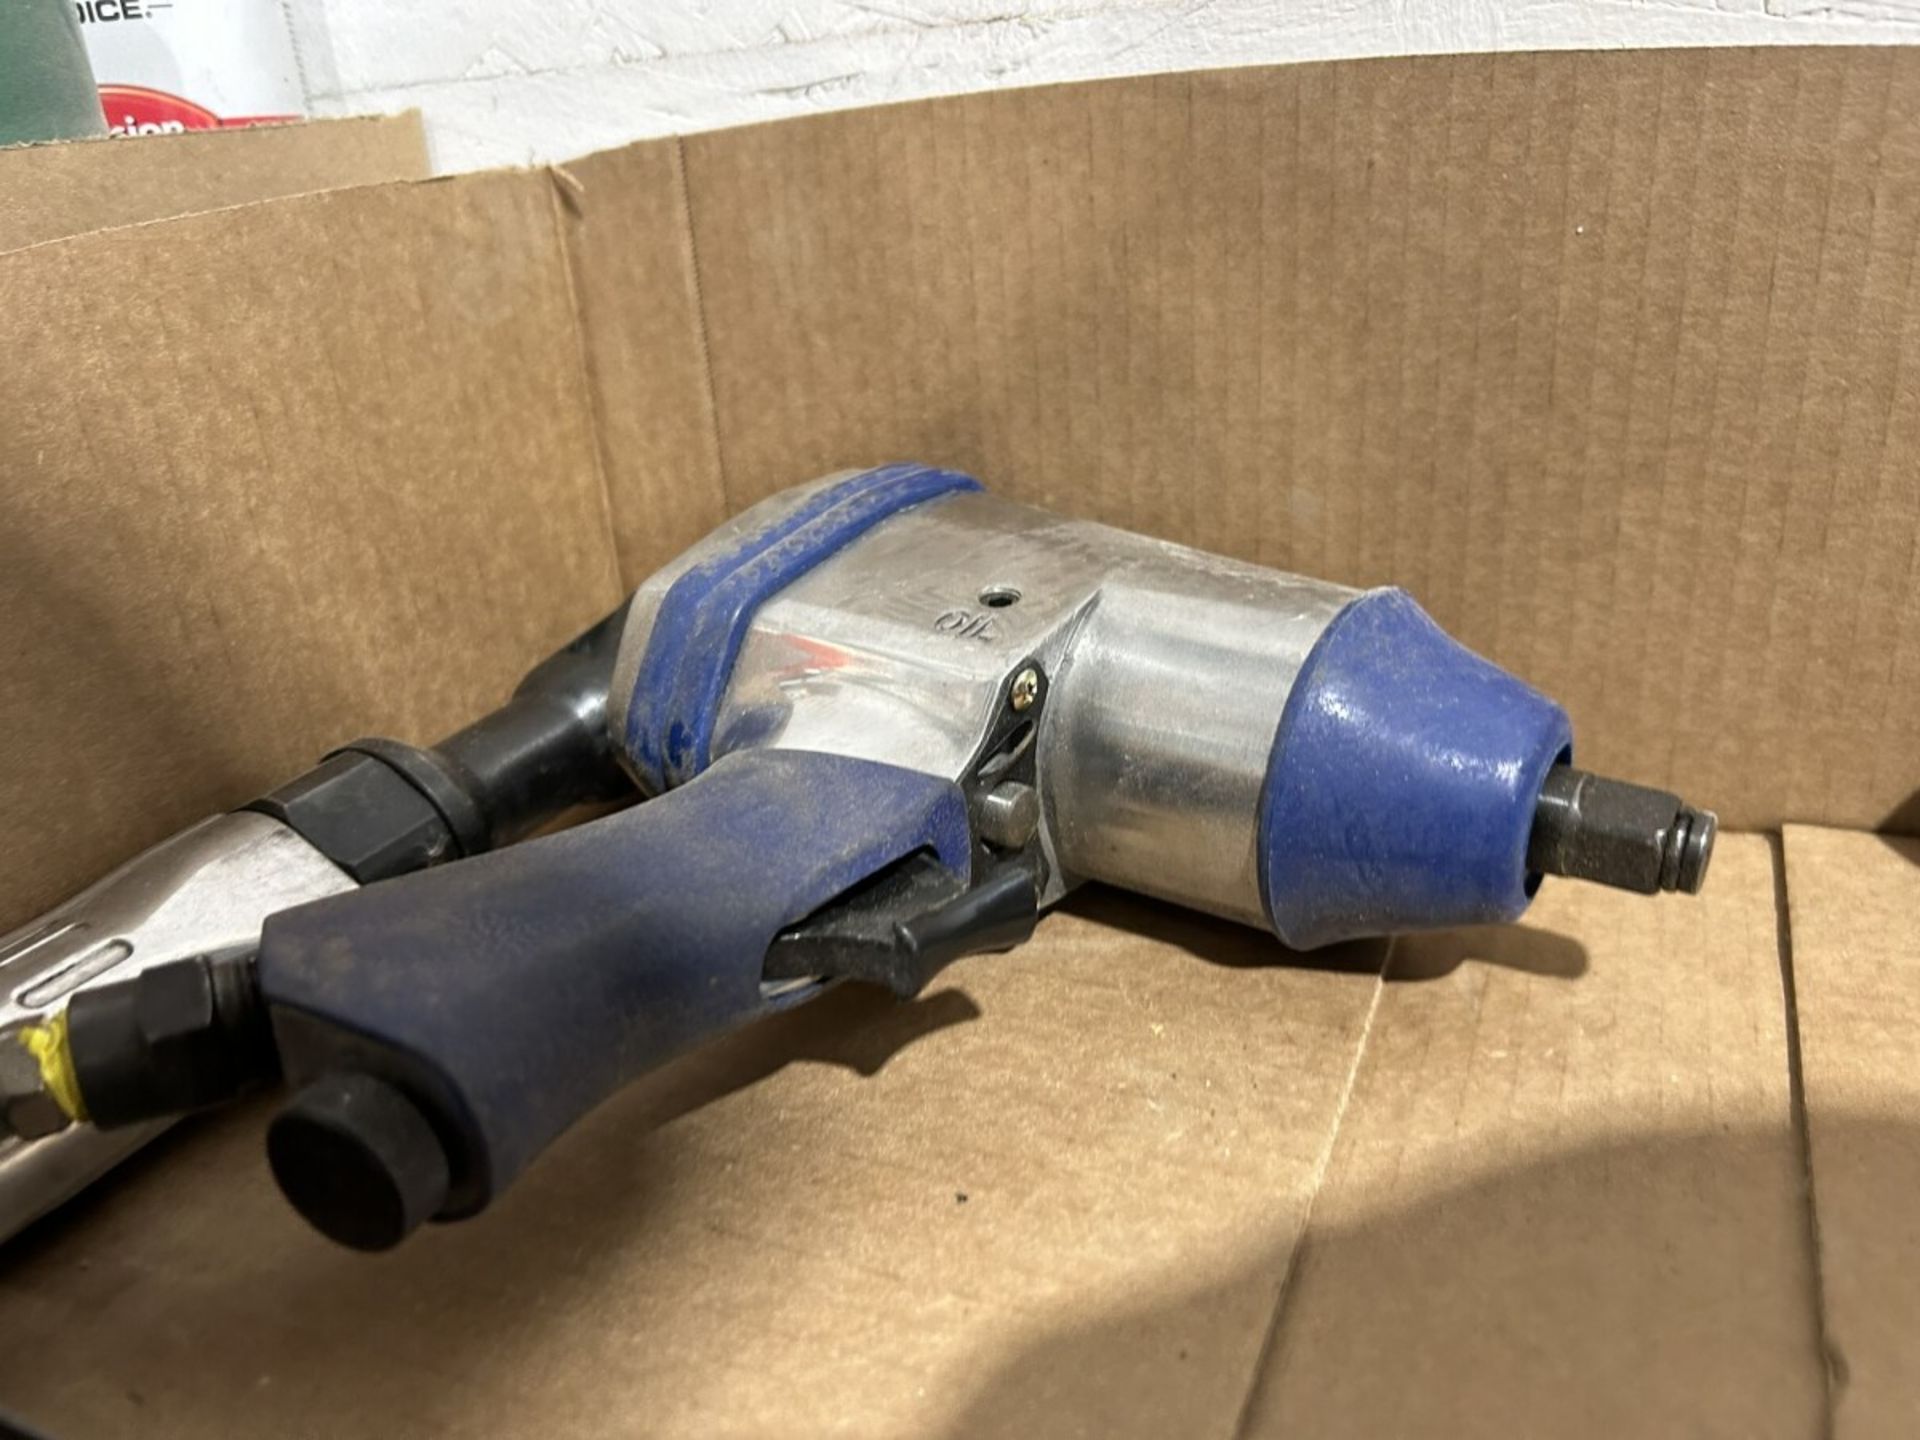 PNEUMATIC 1/2" IMPACT WRENCH, 3/8" RATCHET, DRILL, AND ASSORTED IMPACT SOCKETS - Image 4 of 9